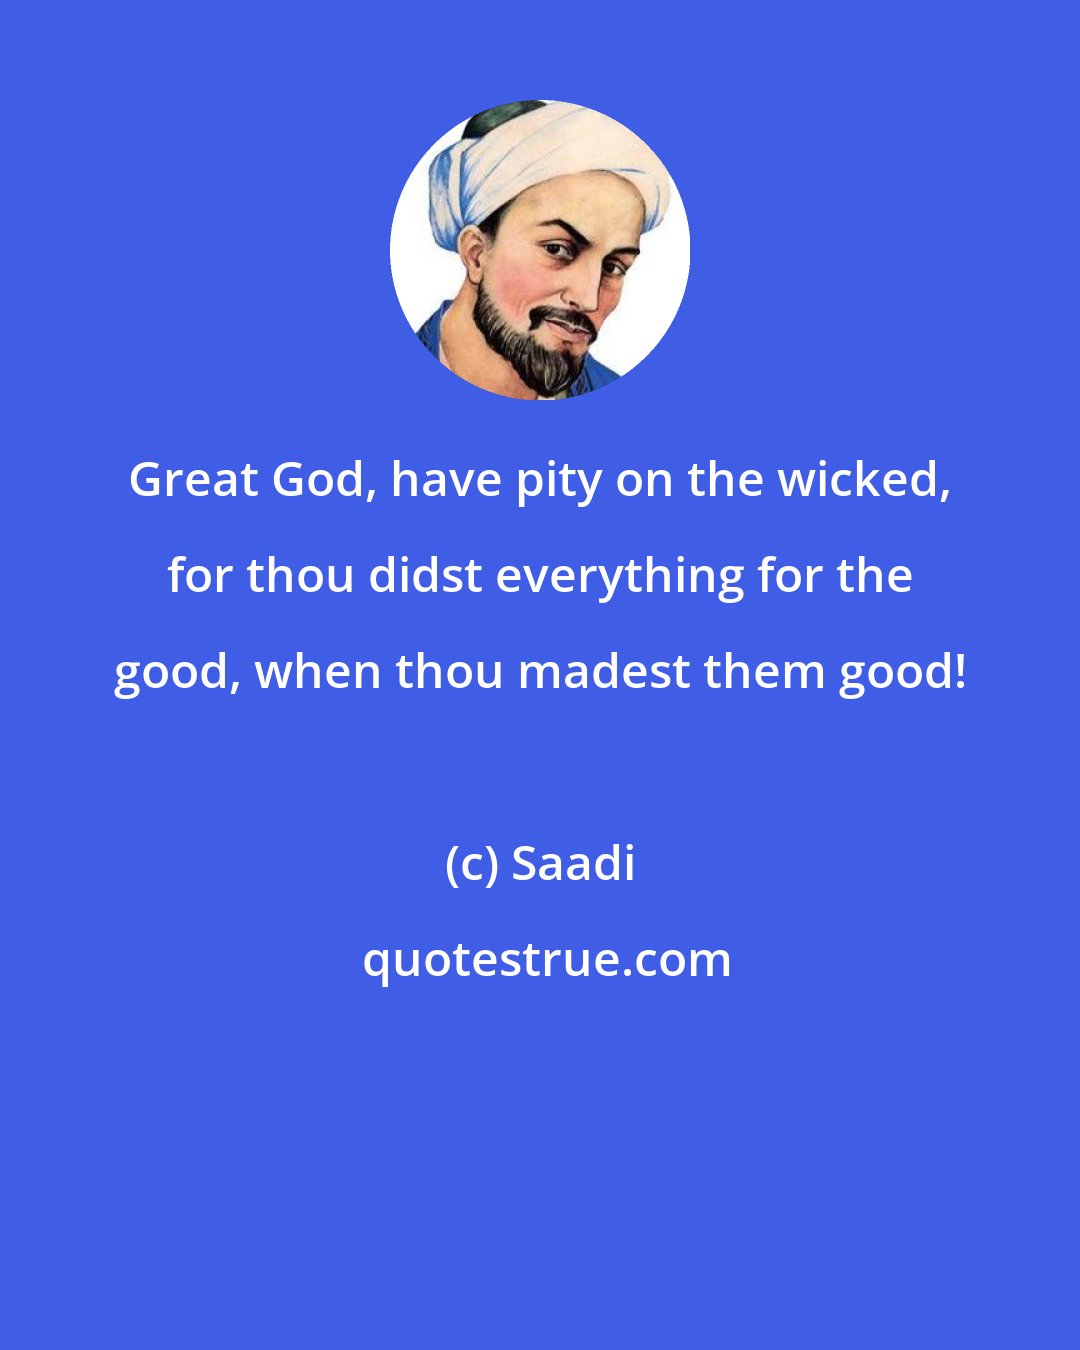 Saadi: Great God, have pity on the wicked, for thou didst everything for the good, when thou madest them good!